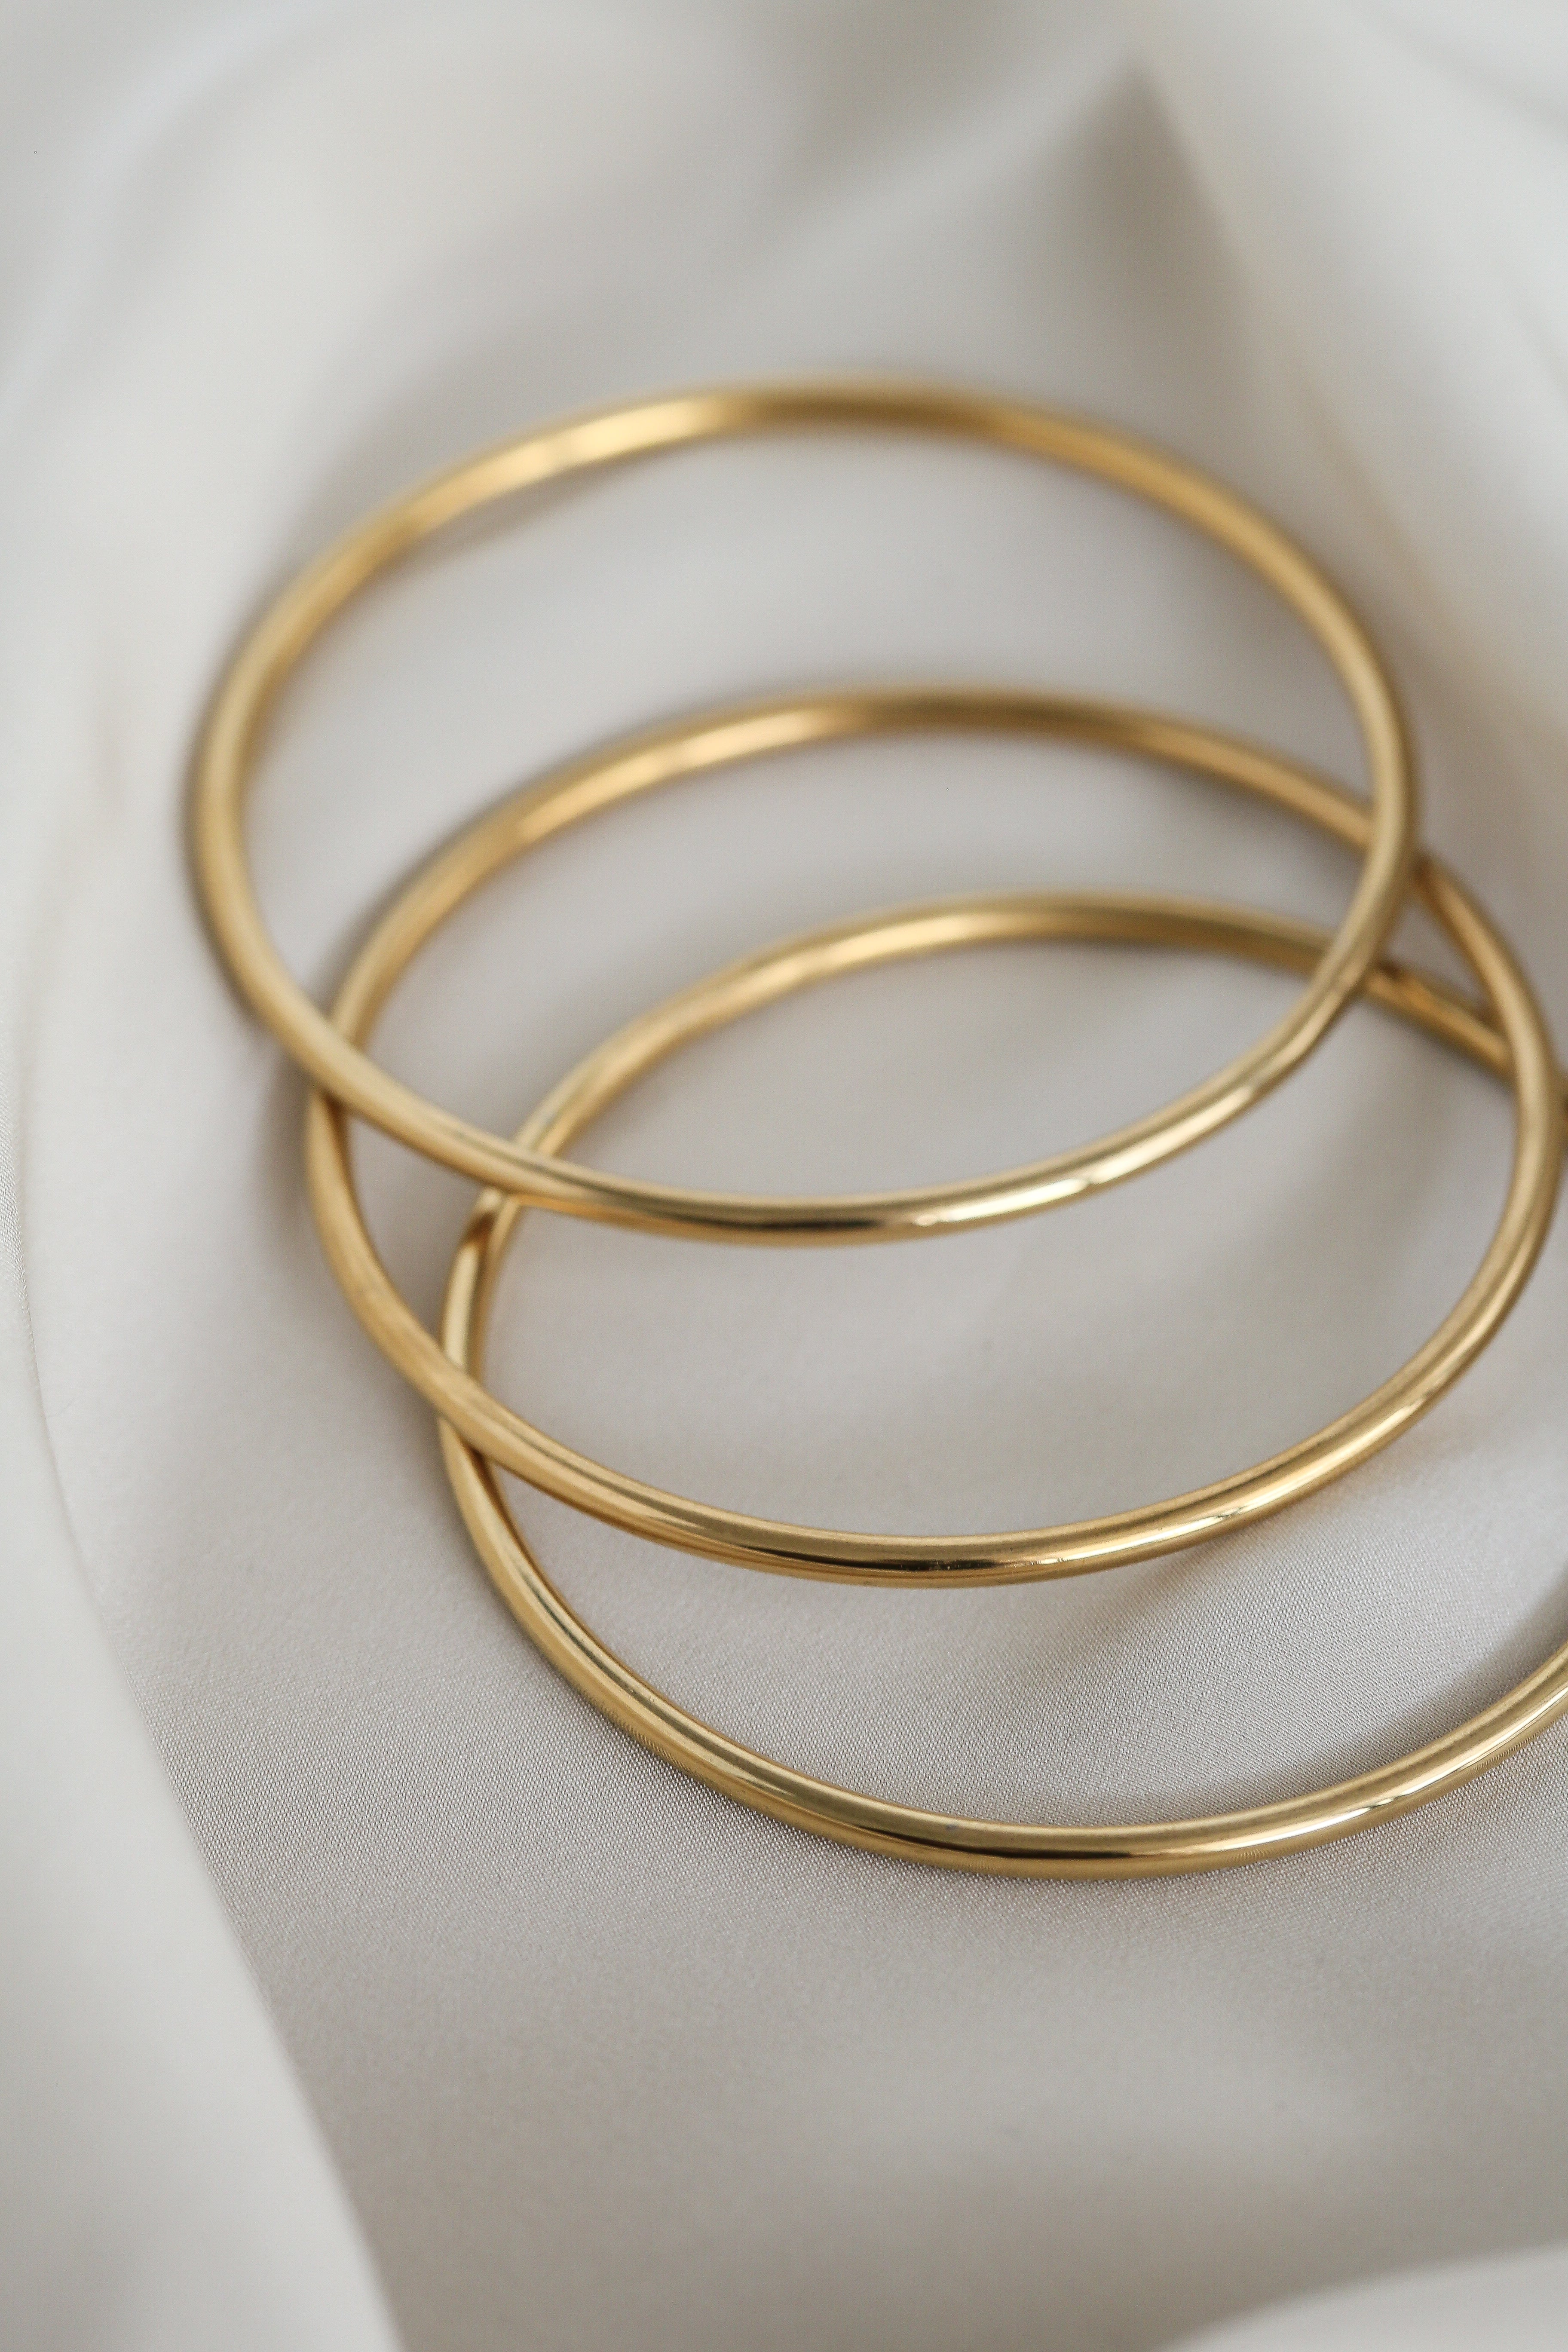 Lola Bangles - Boutique Minimaliste has waterproof, durable, elegant and vintage inspired jewelry